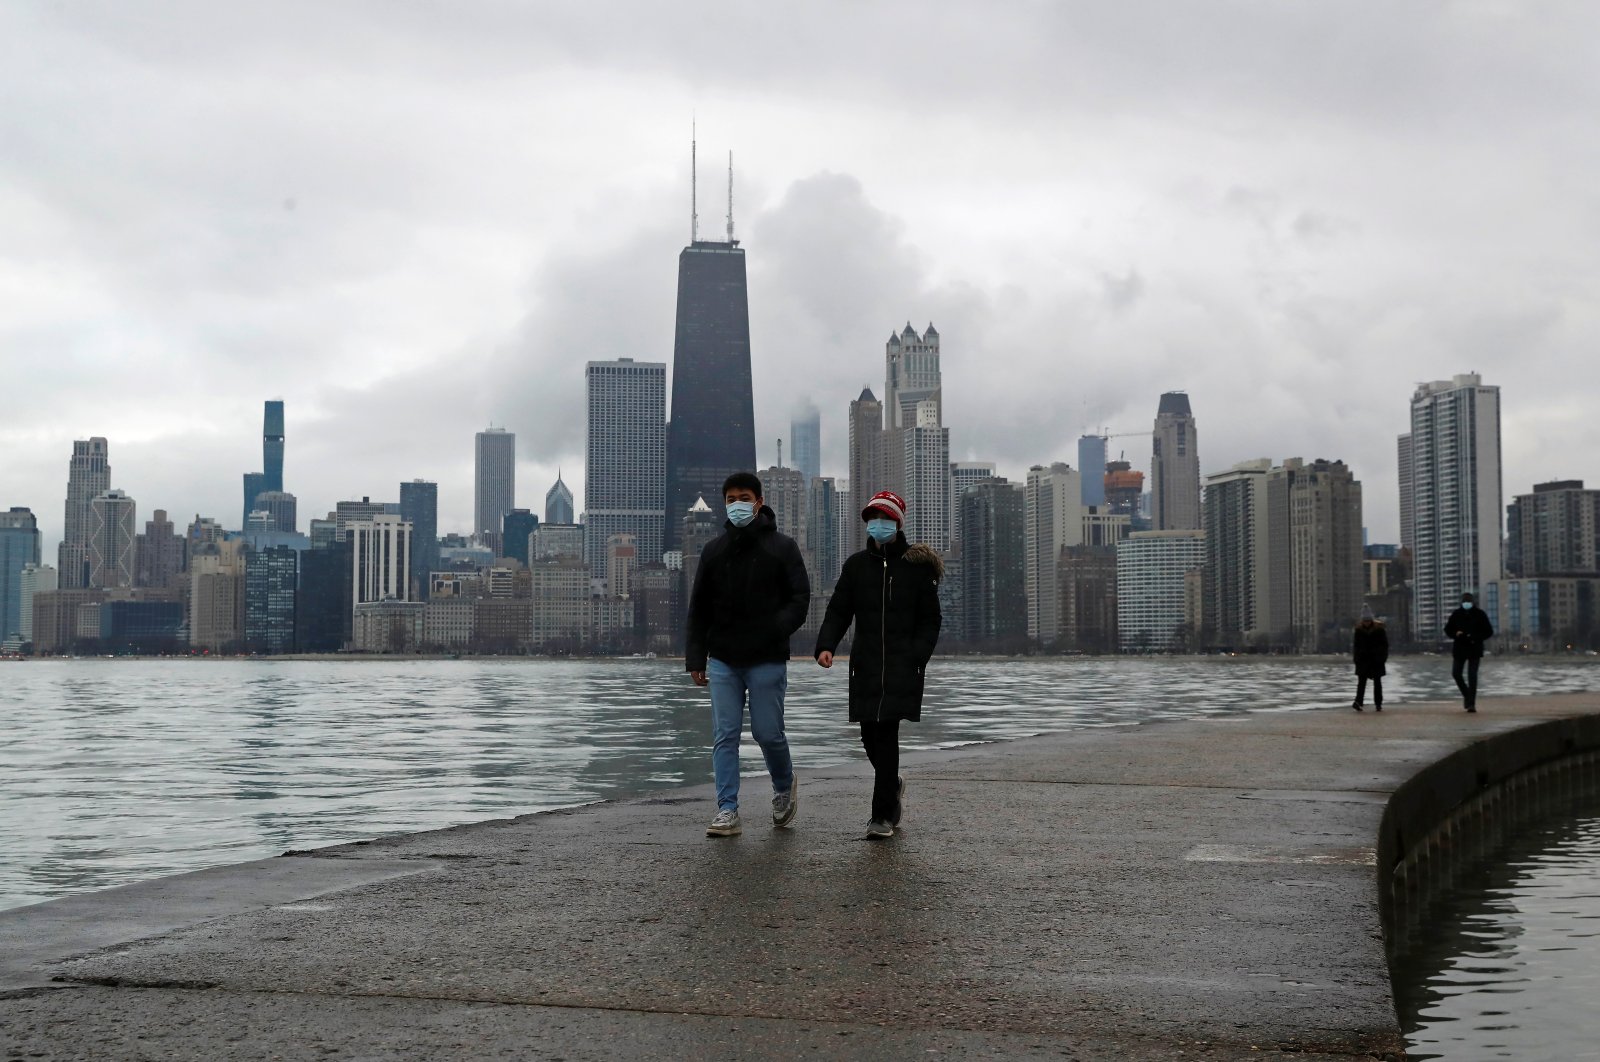 People wearing protective masks walk along the shores of Lake Michigan in Chicago, Illinois, U.S., Dec. 6, 2020. (Reuters Photo)